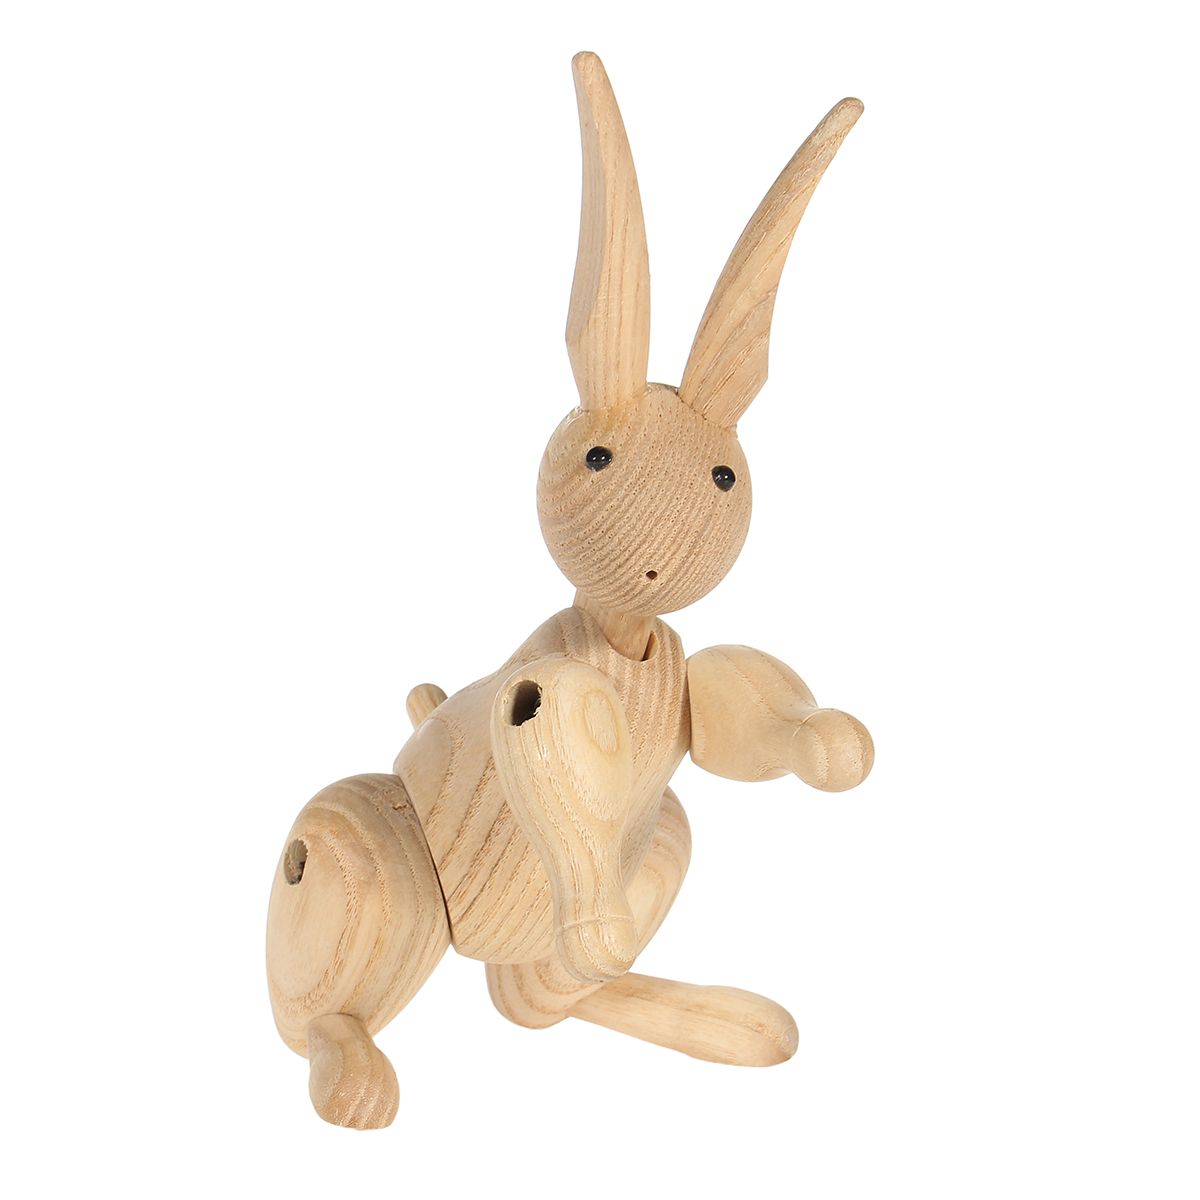 Wood-Carving-Miss-Rabbit-Figurines-Joints-Puppets-Animal-Art-Home-Decoration-Crafts-1241724